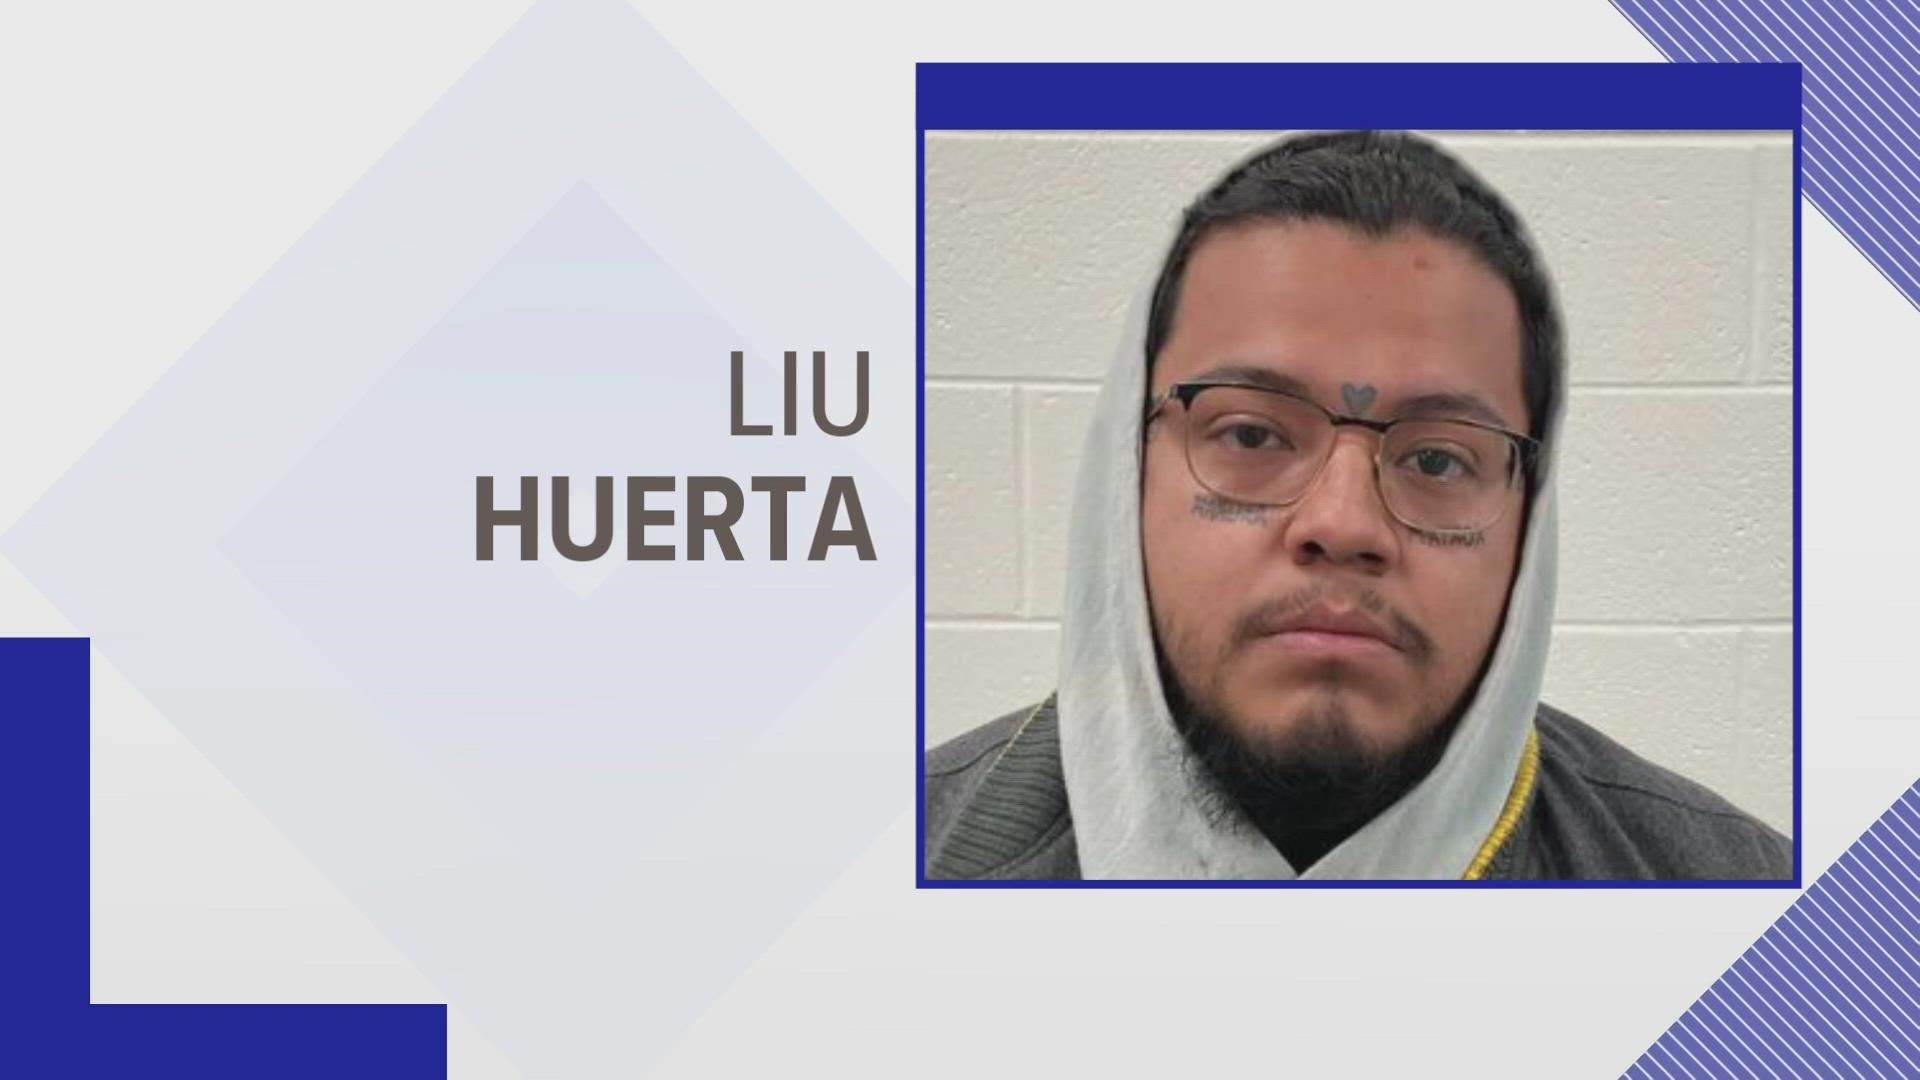 Suspect Liu Huerta is arrested after a shooting in Sweetwater left one person dead.